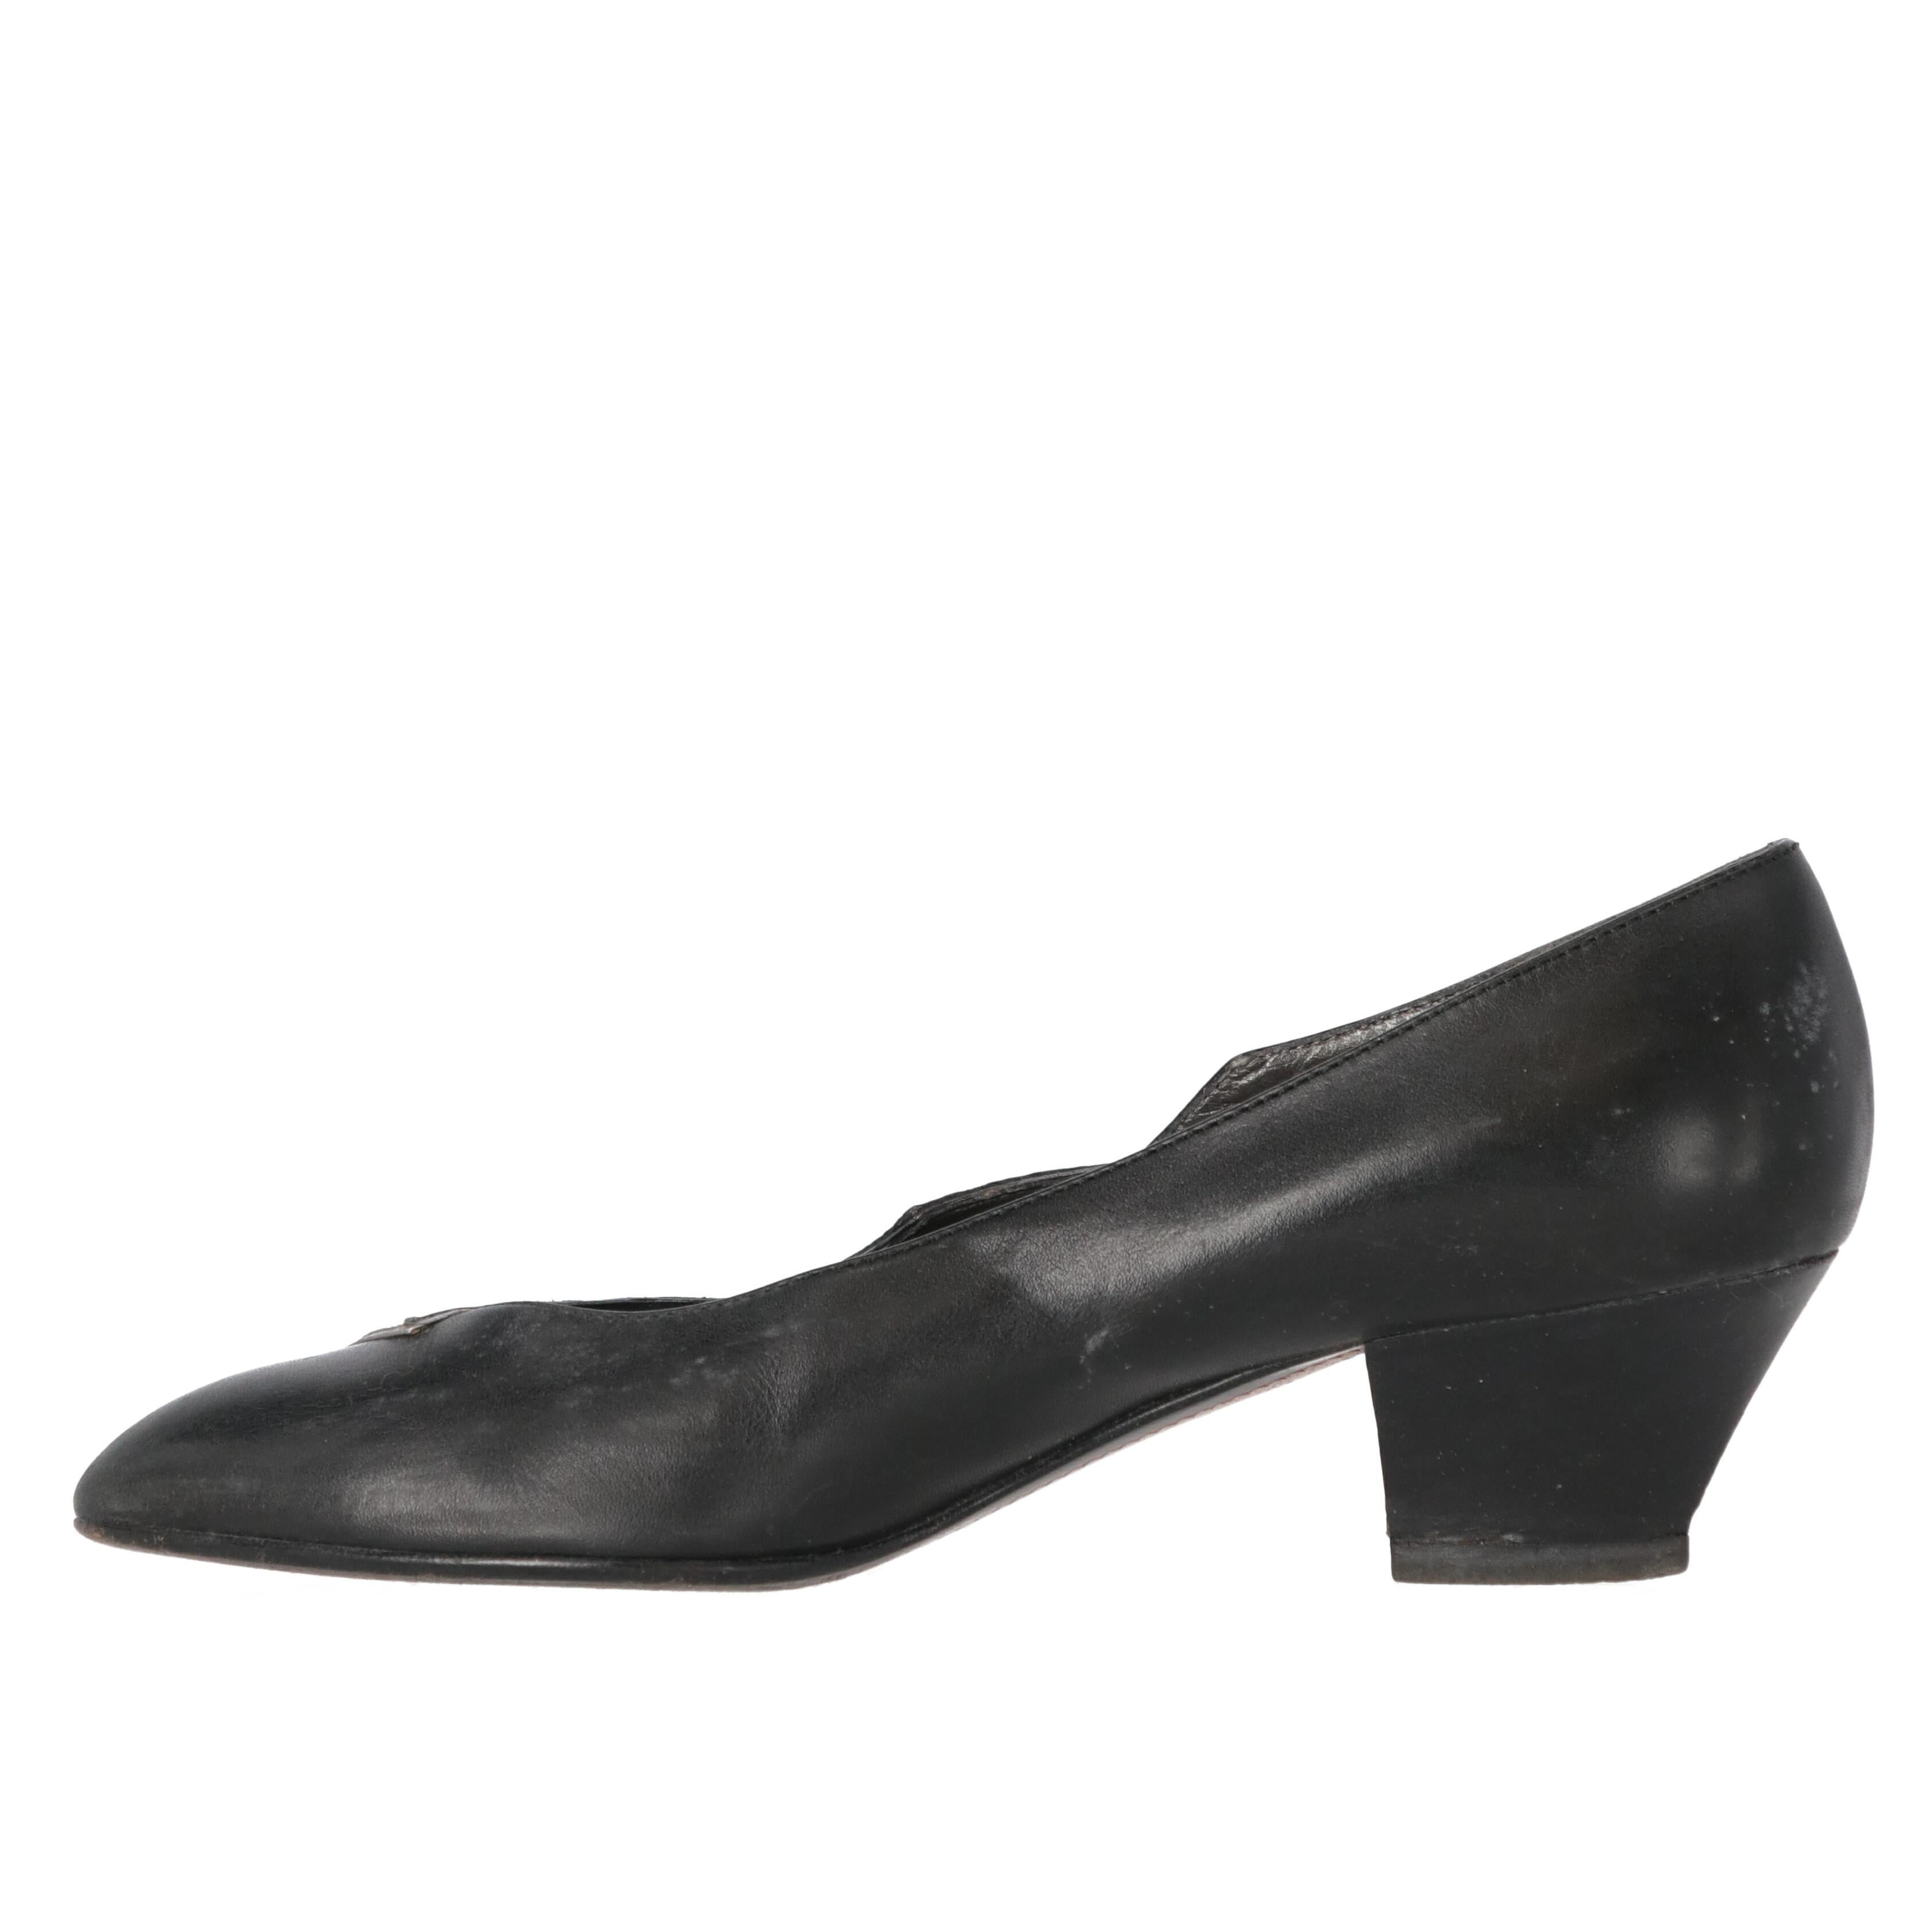 Sergio Rossi black genuine leather low-heeled pumps with contrasting printed black leather insert and silver hems. Pointed toe and silver-tone decorative small studs on the sides.

The item shows signs of wear on the leather and the sole, as shown